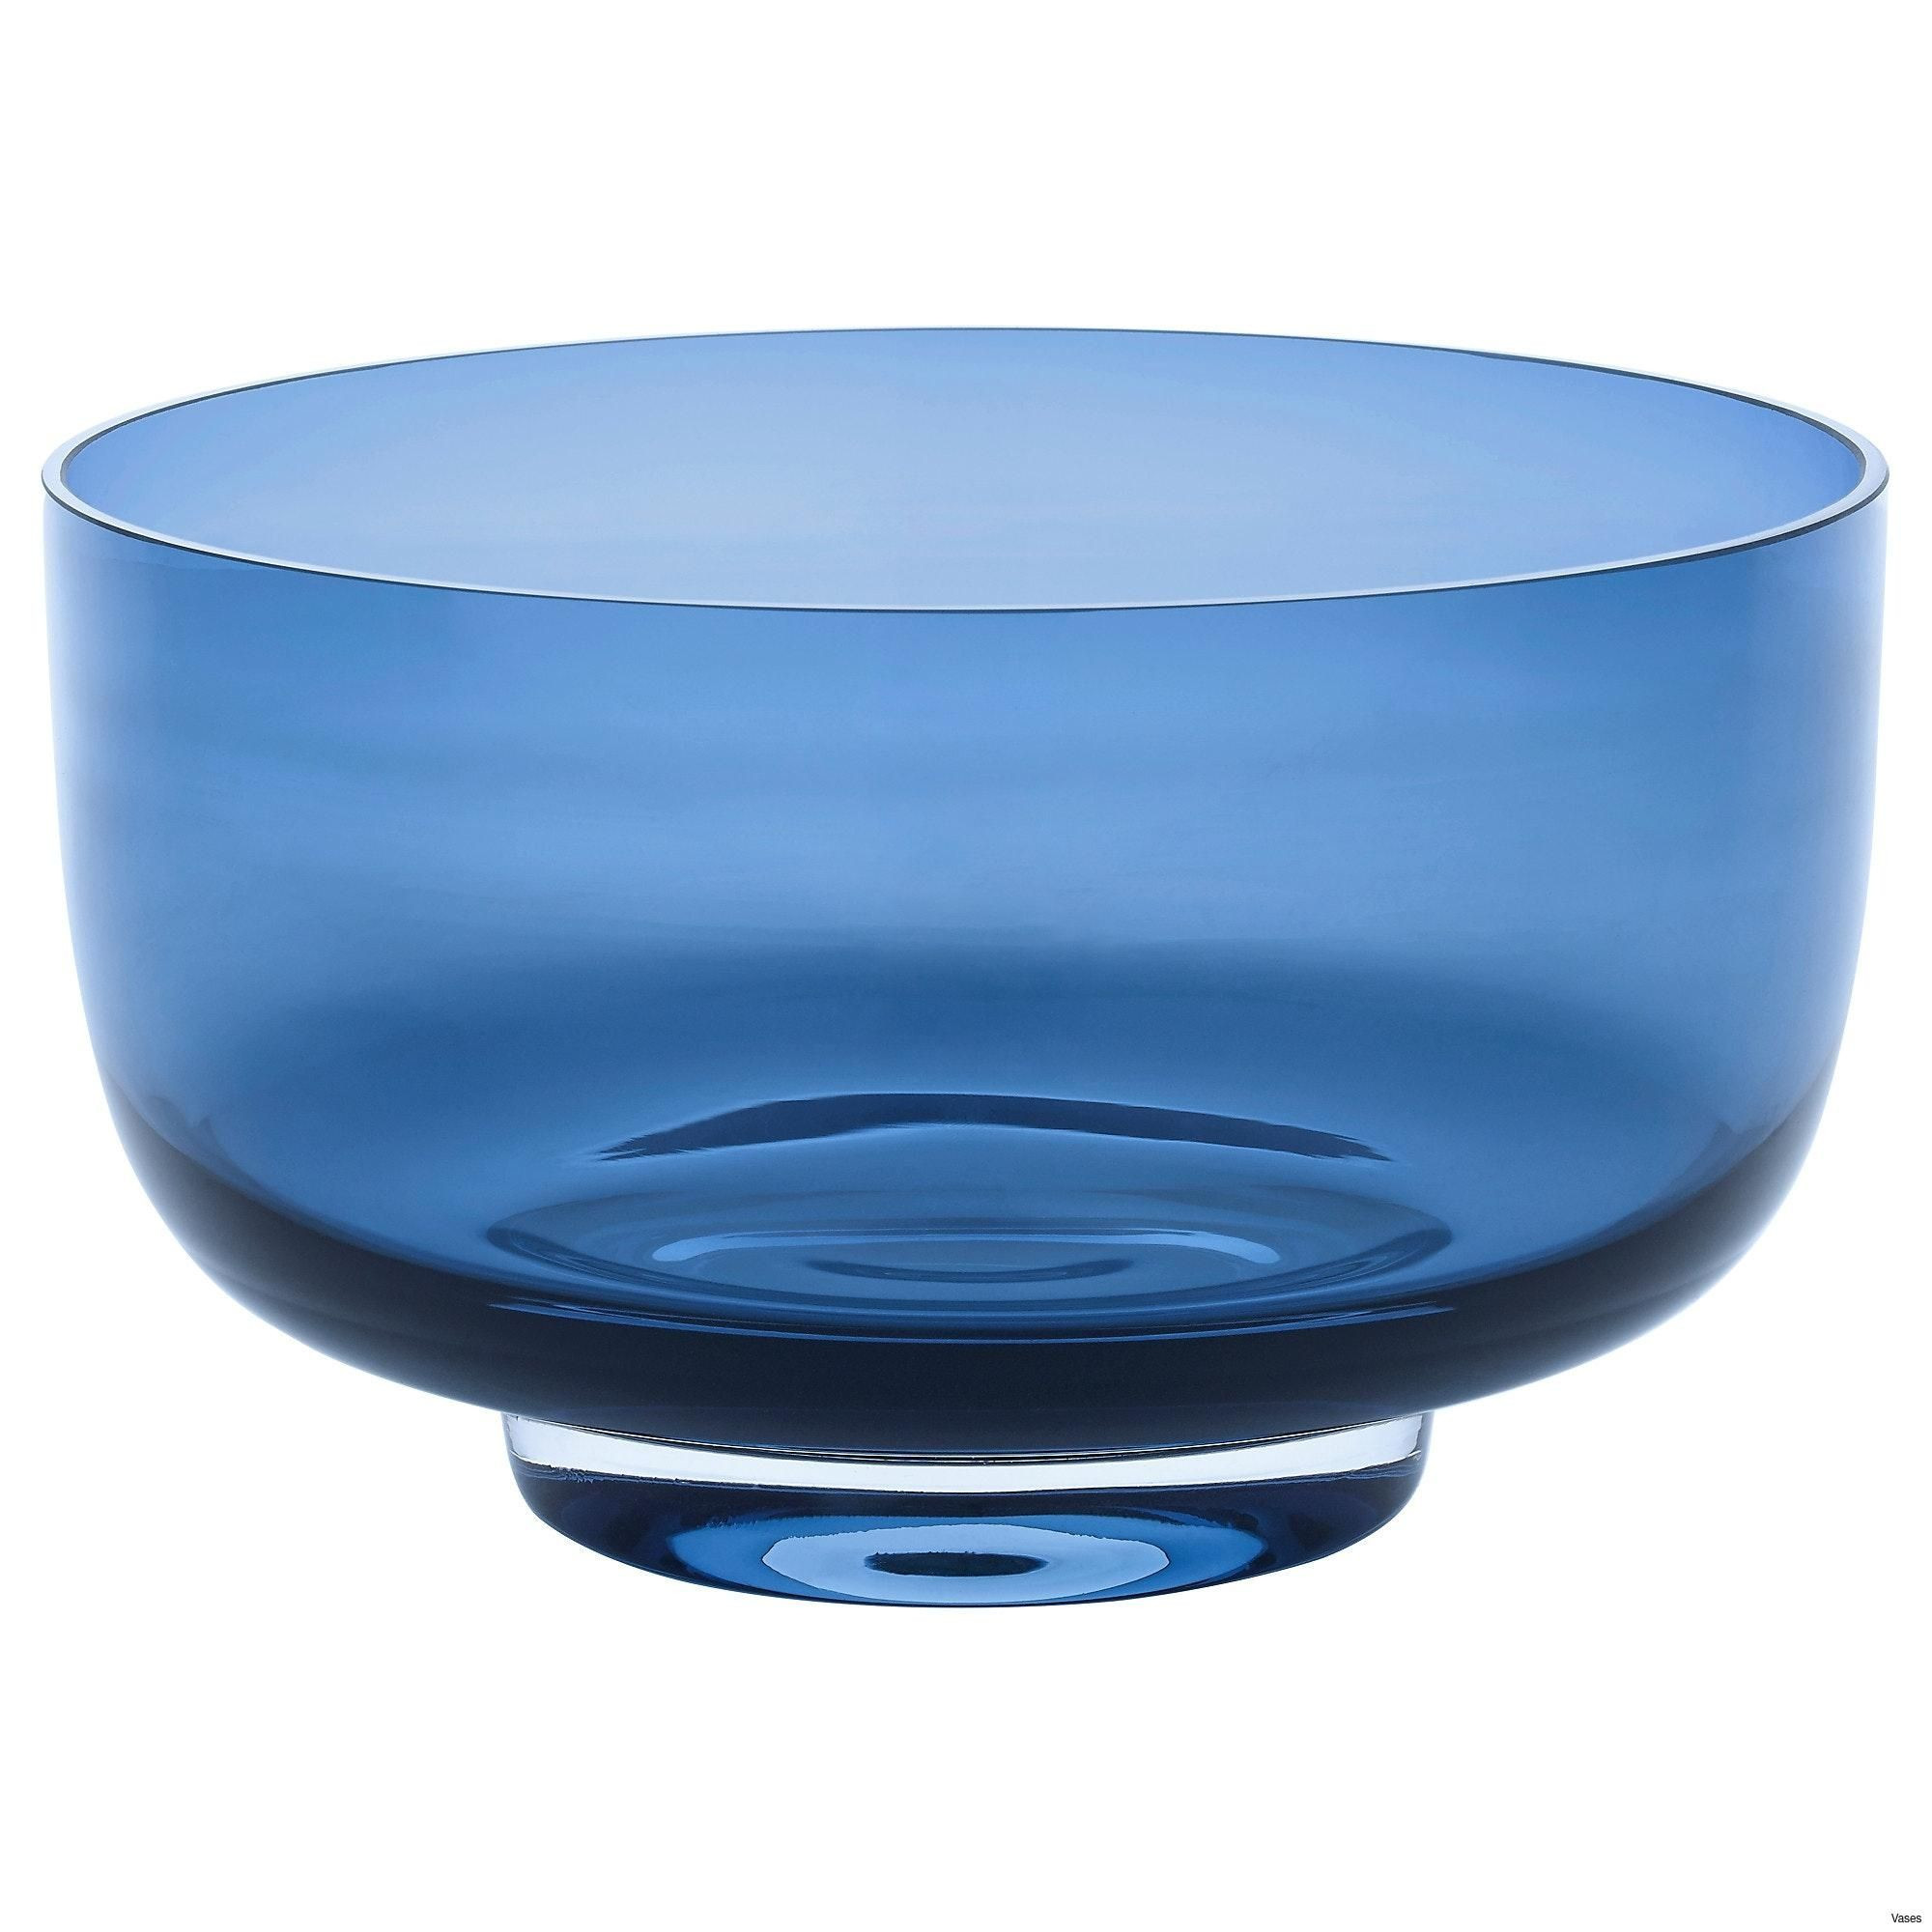 21 Best Blue Glass Vase 2024 free download blue glass vase of blue crystal vase unique decorative glass bowl new living room ikea with regard to blue crystal vase unique decorative glass bowl new living room ikea vases awesome pe s5h